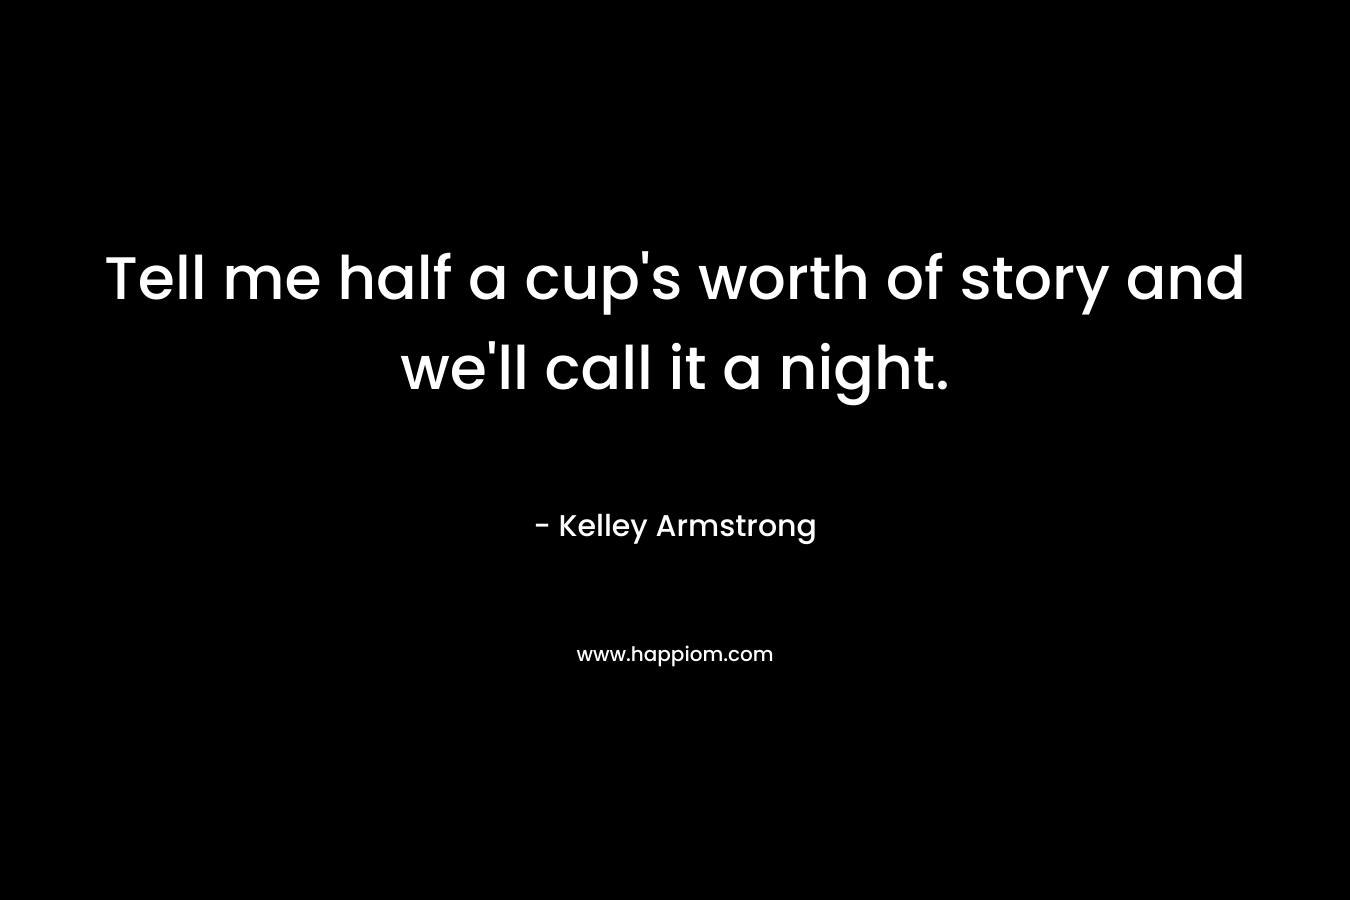 Tell me half a cup’s worth of story and we’ll call it a night. – Kelley Armstrong